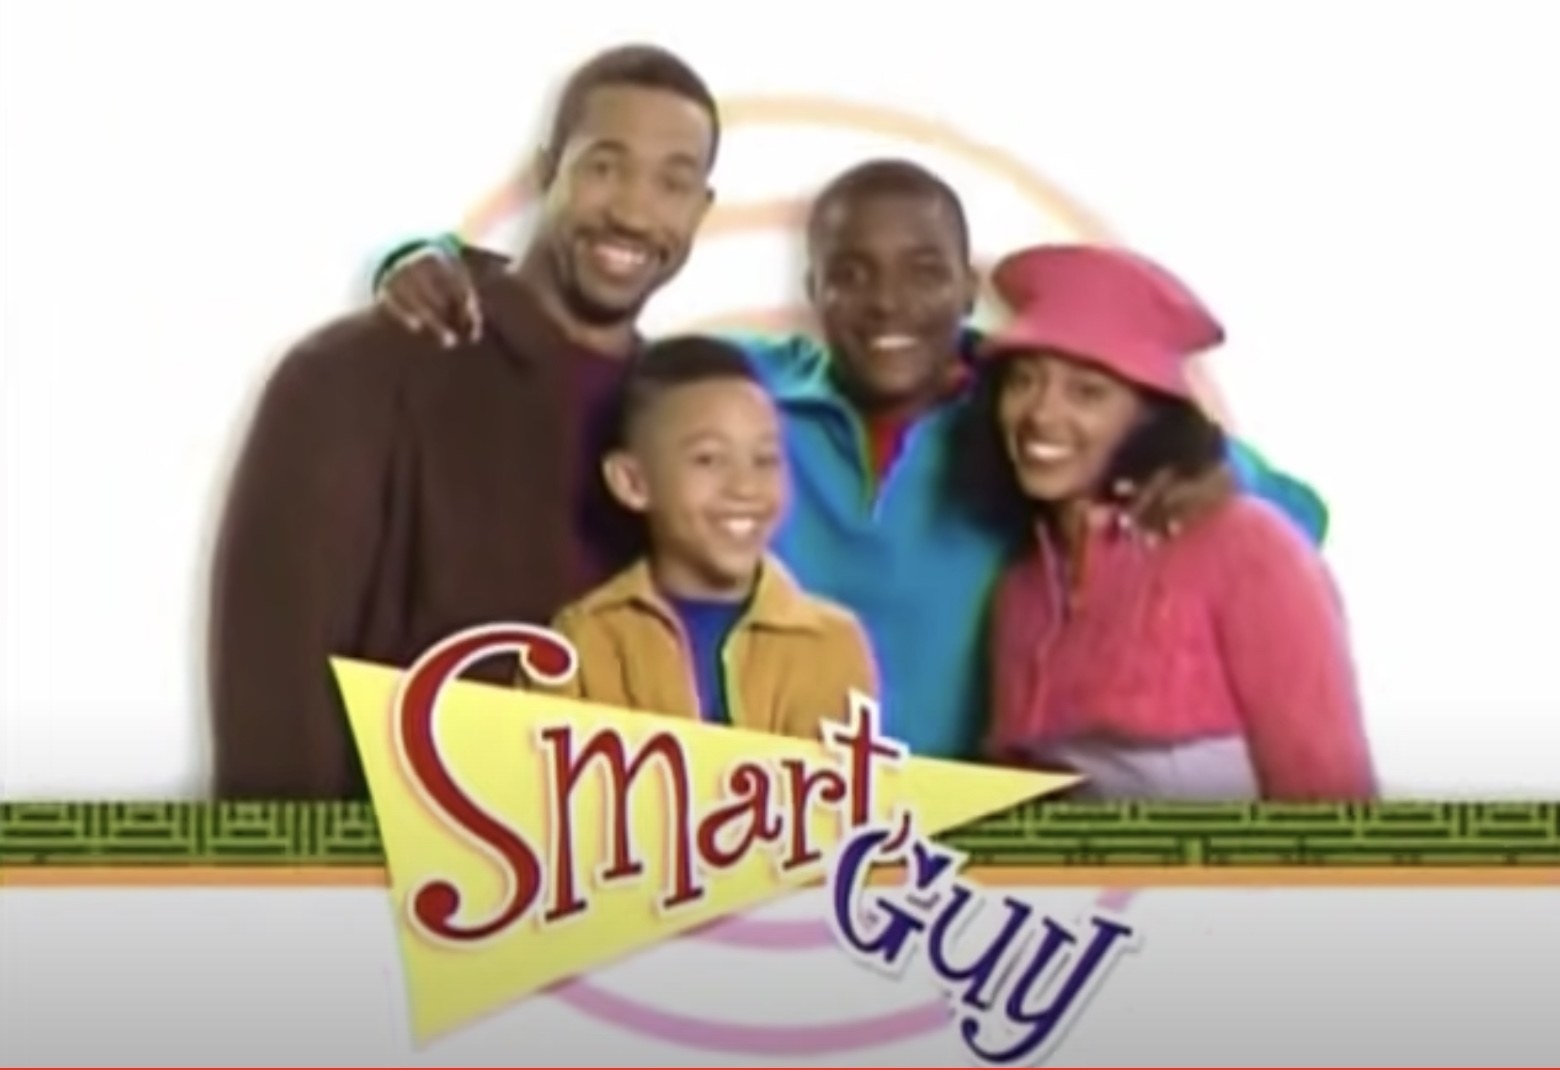 The title screen for Smart Guy